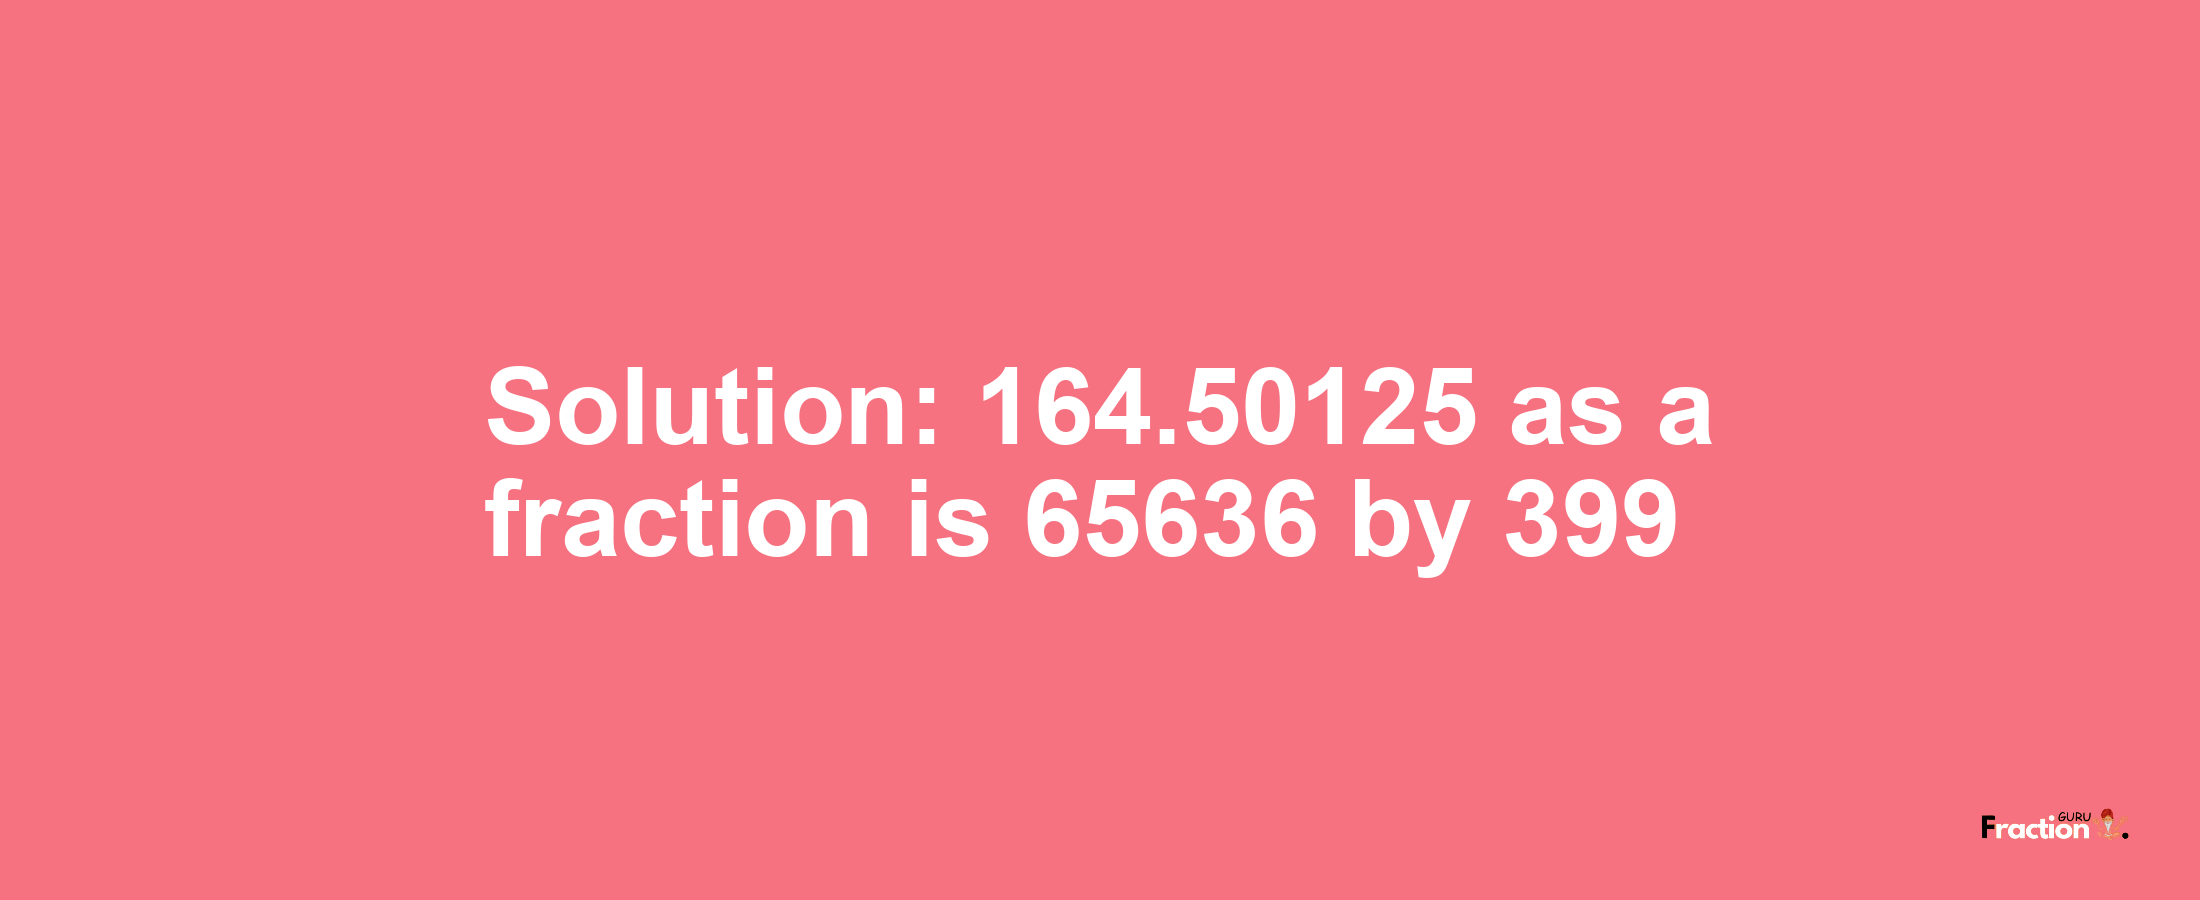 Solution:164.50125 as a fraction is 65636/399